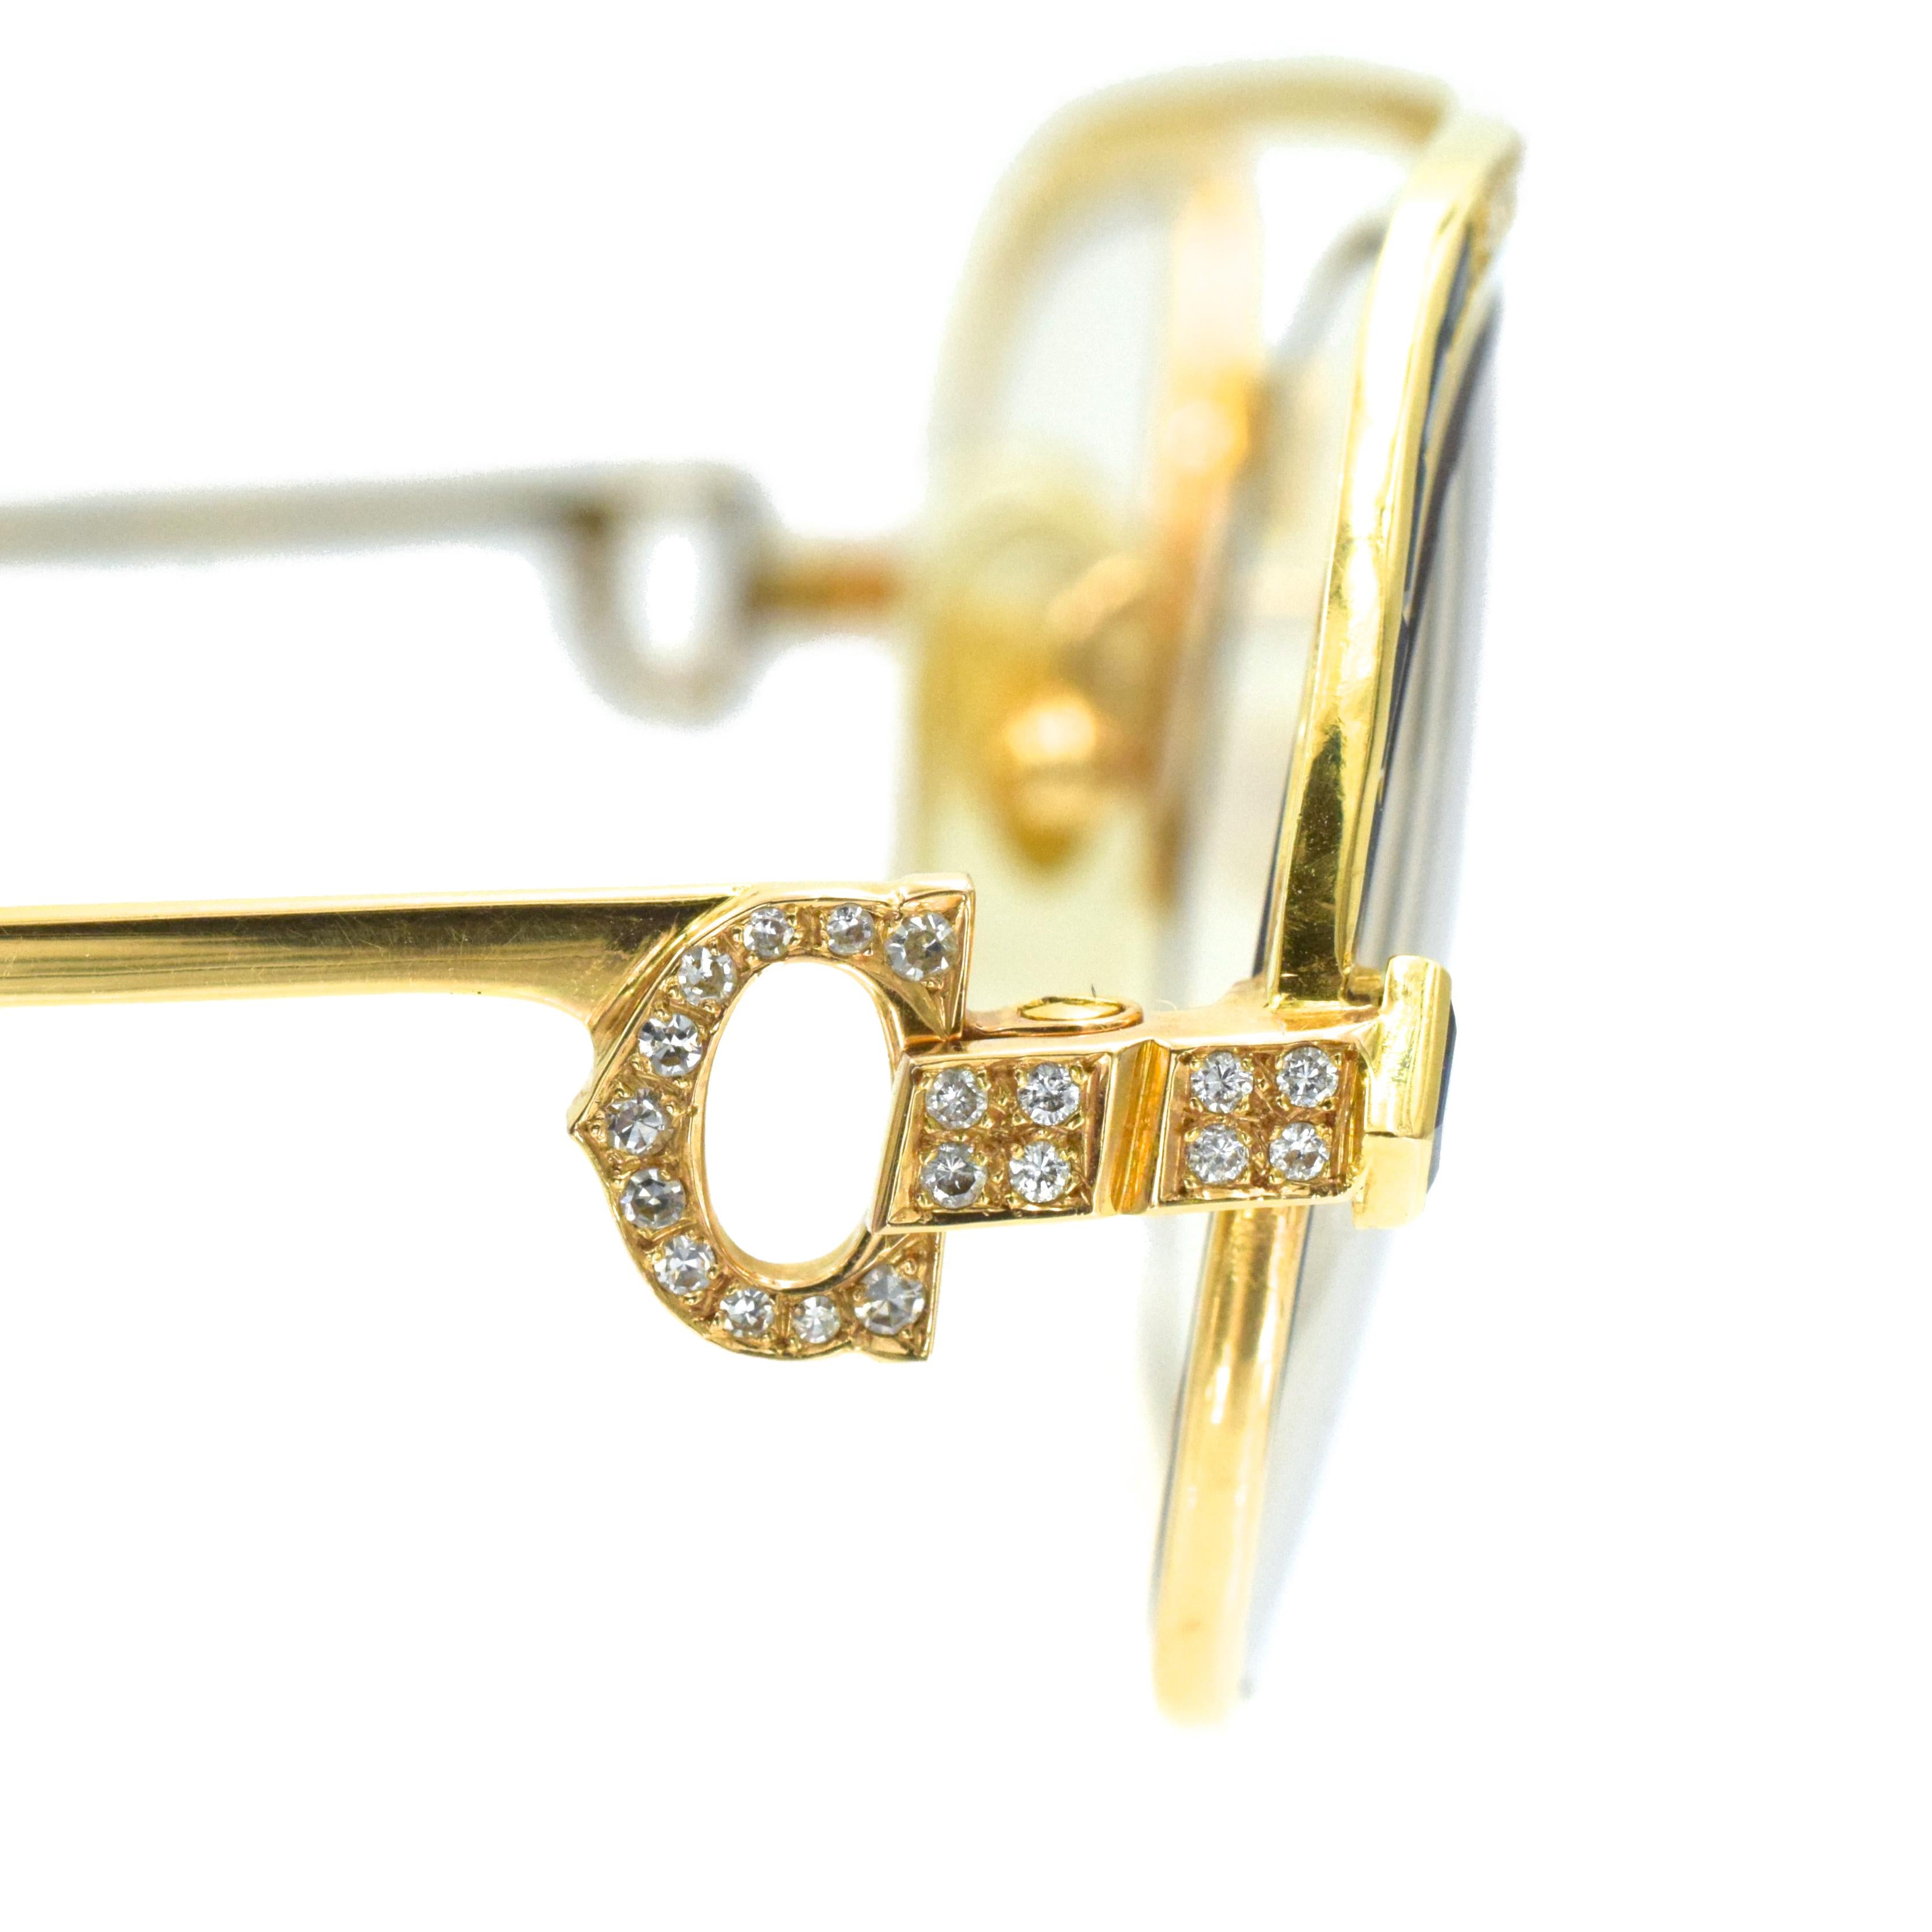 Cartier Gold, Diamond and Sapphire Eyeglasses, France 1